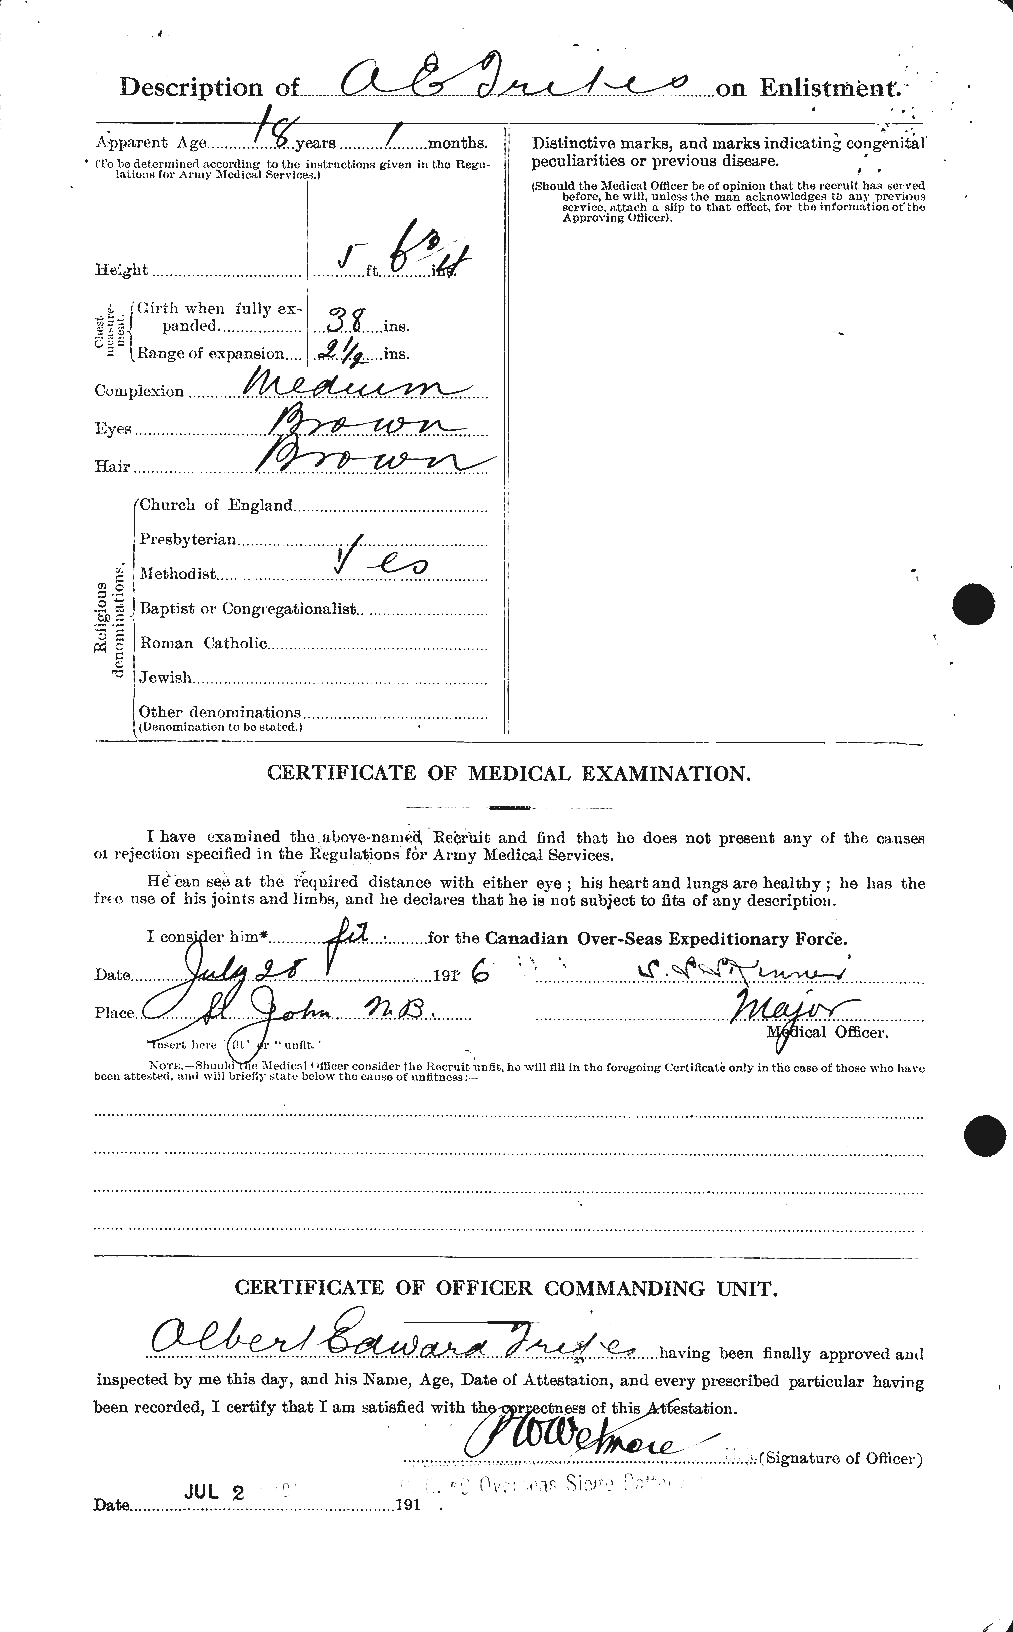 Personnel Records of the First World War - CEF 640145b